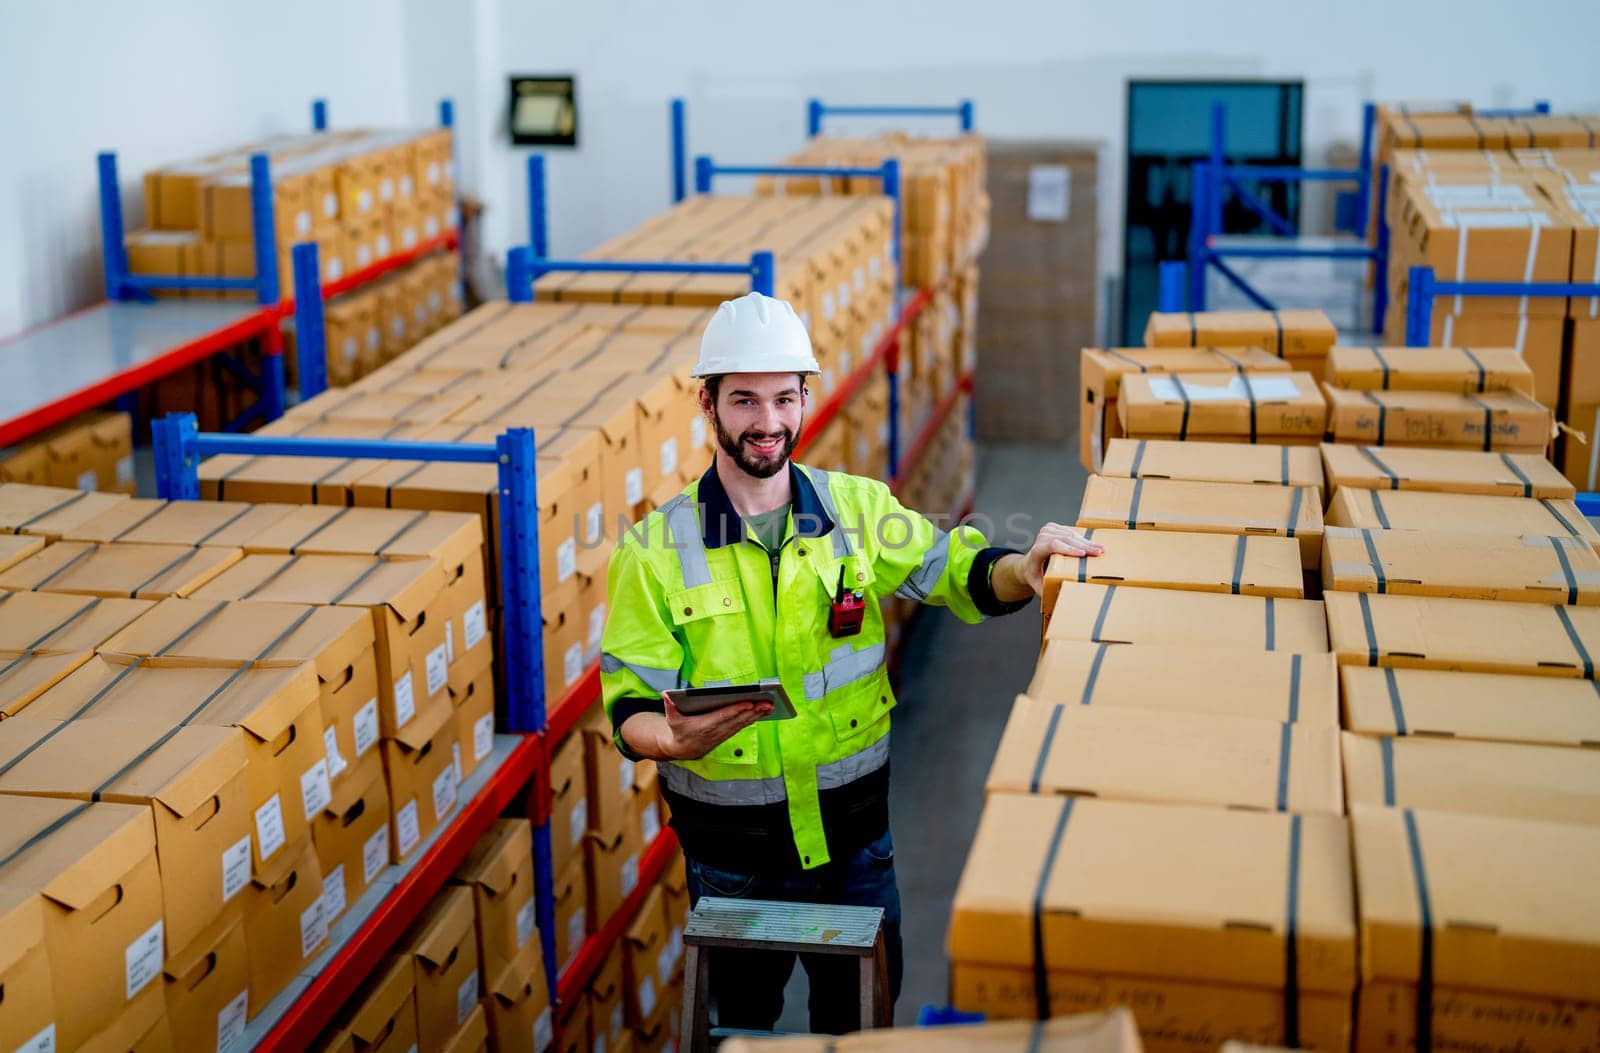 Warehouse worker man hold tablet and look at camera with smiling during stand on stair and check product on shelves in workplace.